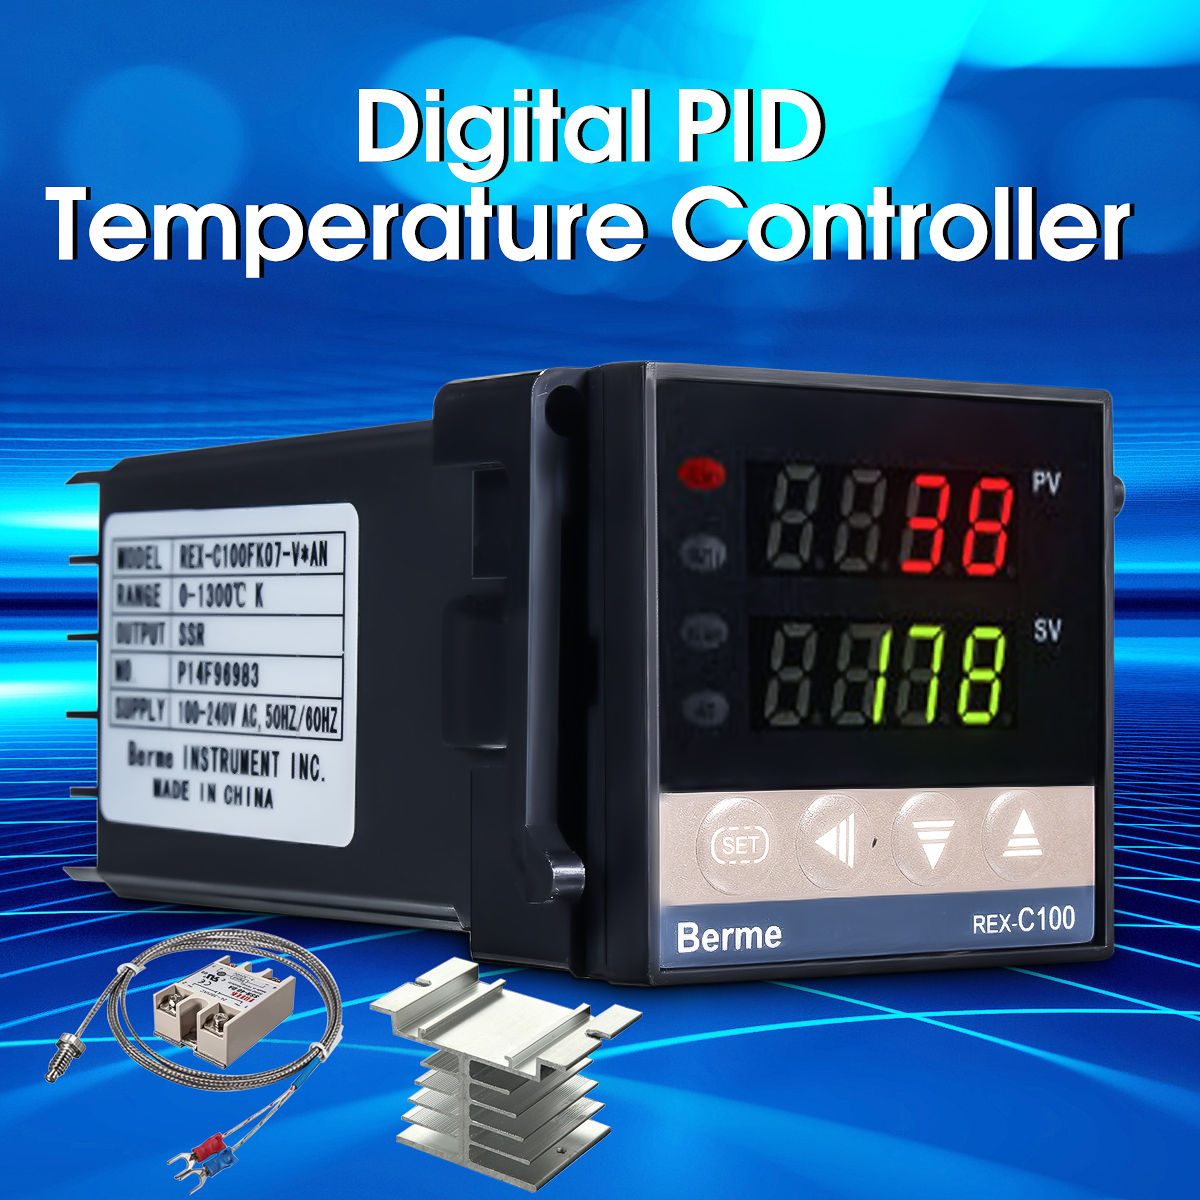 110-240V-01300-REX-C100-Digital-PID-Temperature-Controller-Kit-Alarm-Function-With-Probe-Relay-1351235-3